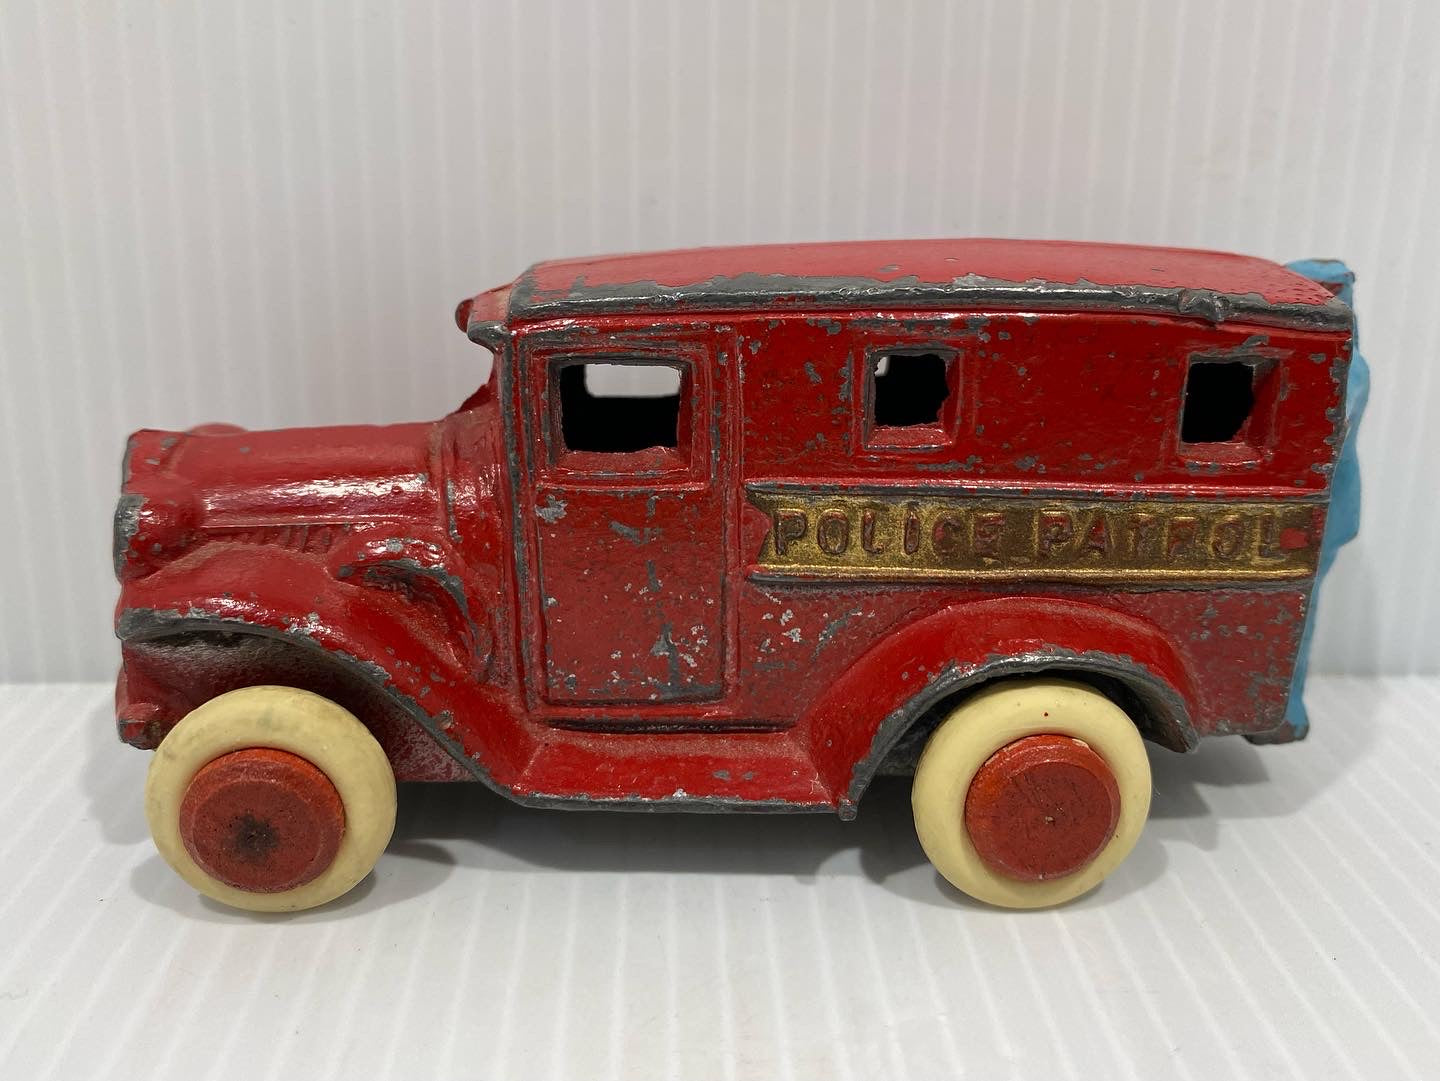 Rare Antique Savoye Pewter Toy Company police patrol Car with a cast-in attendant perched precariously on the rear step